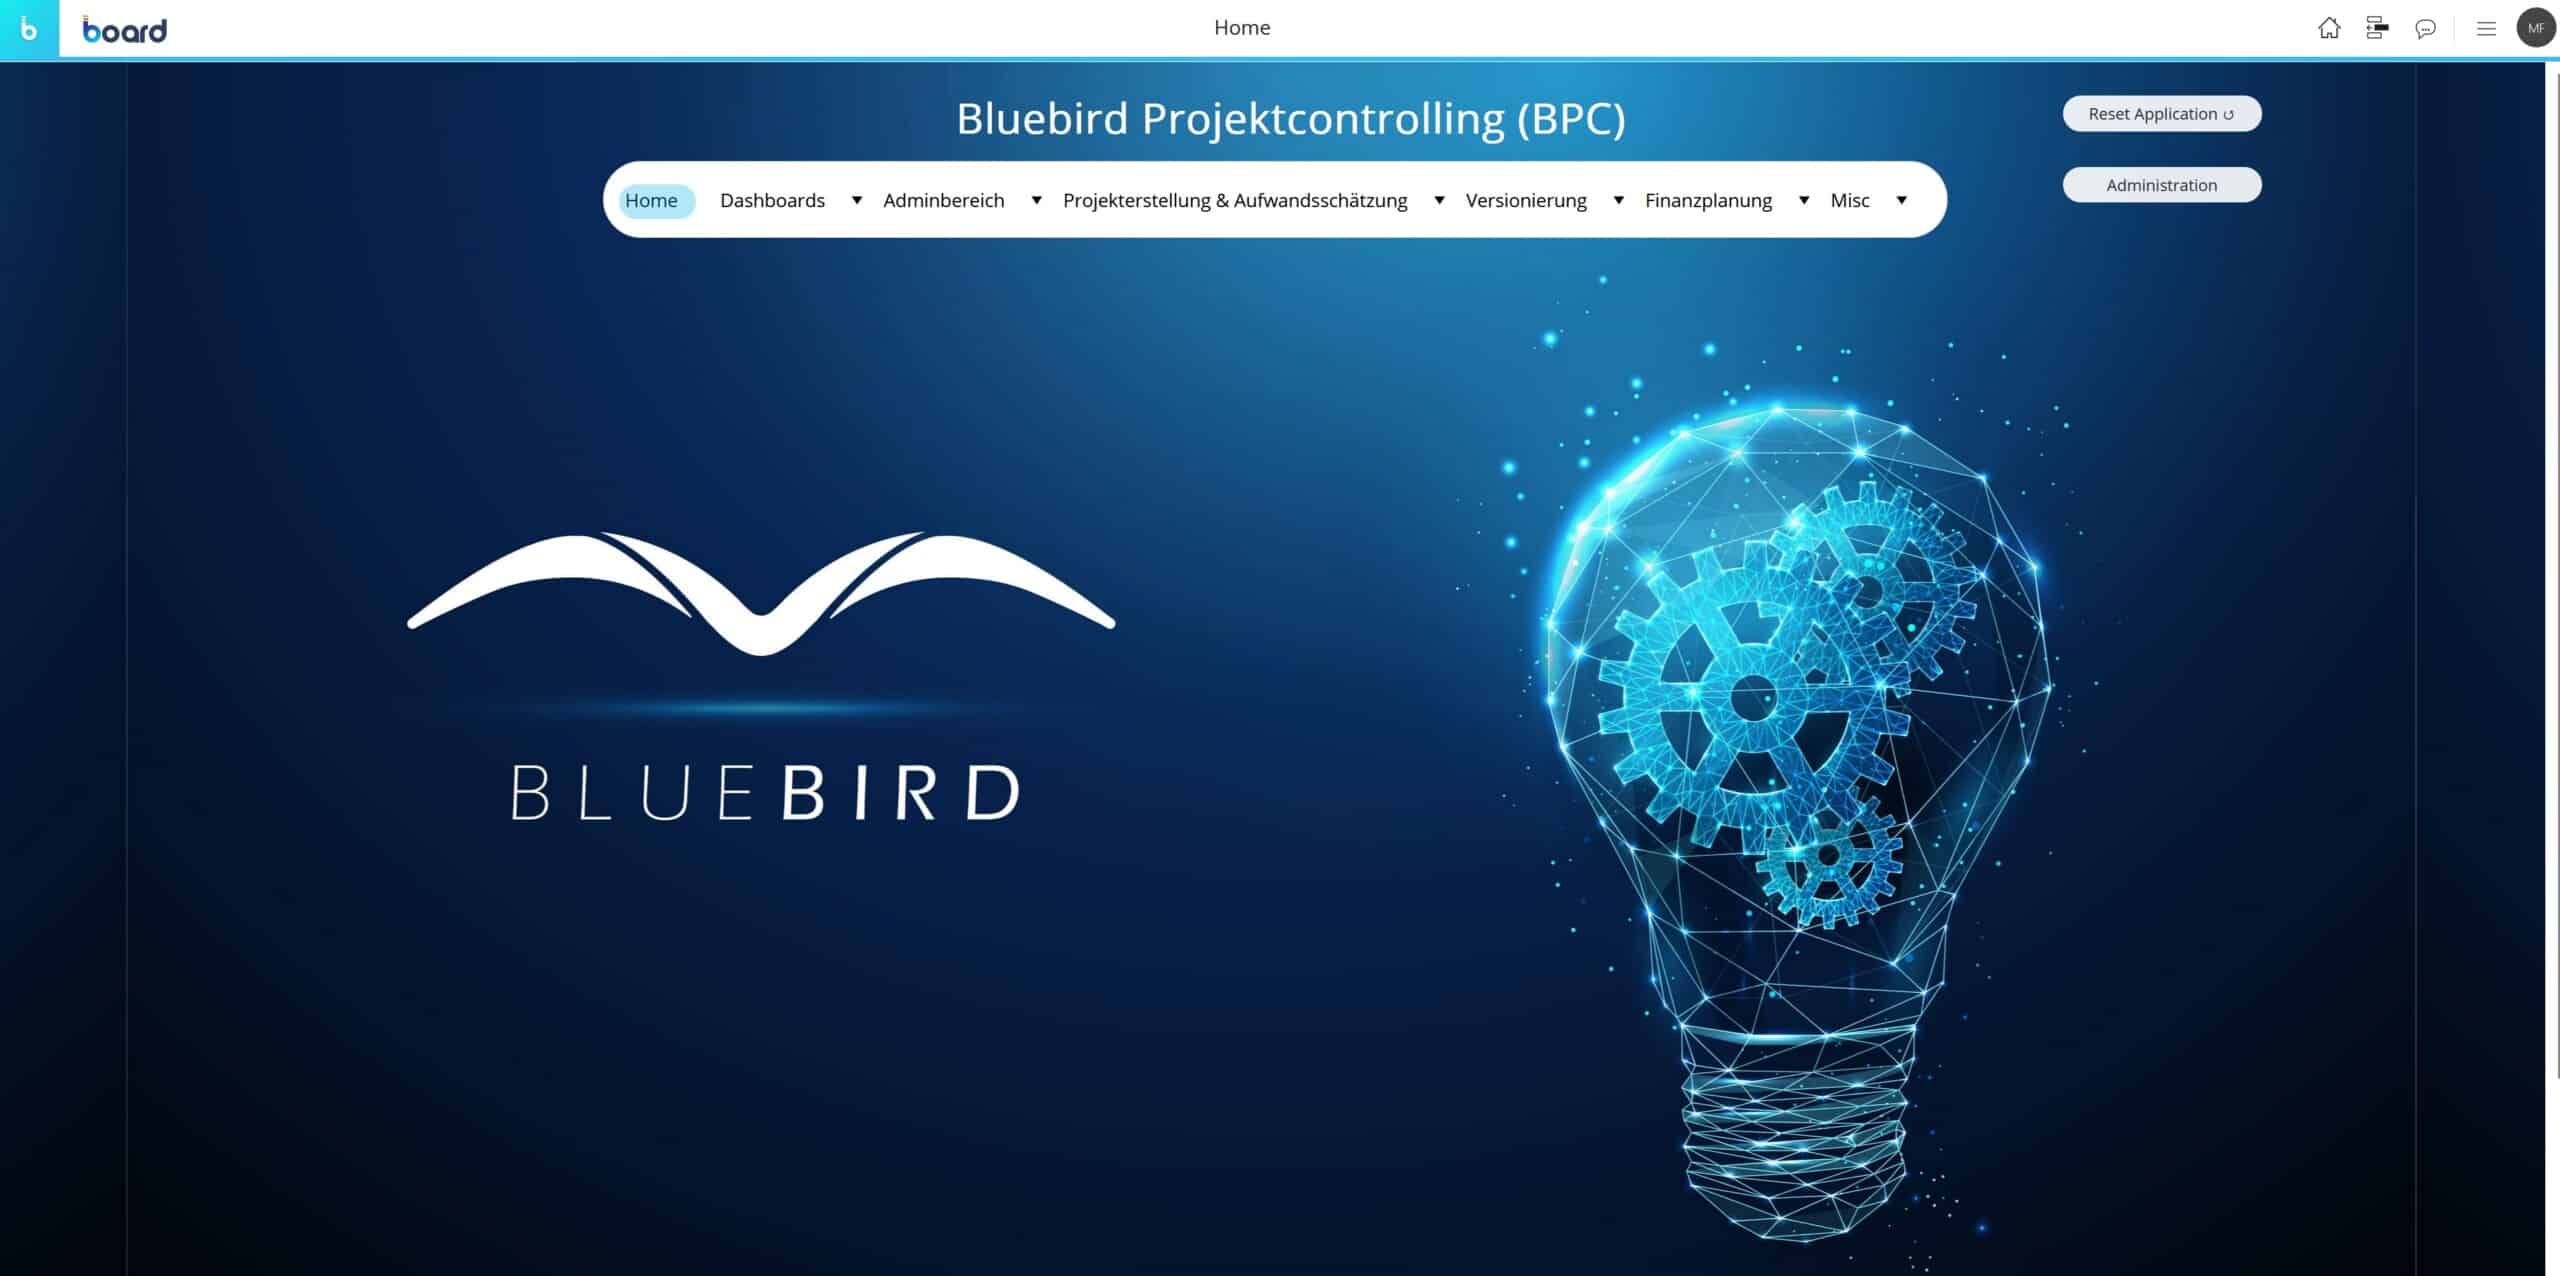 The Bluebird website is displayed on a computer screen.